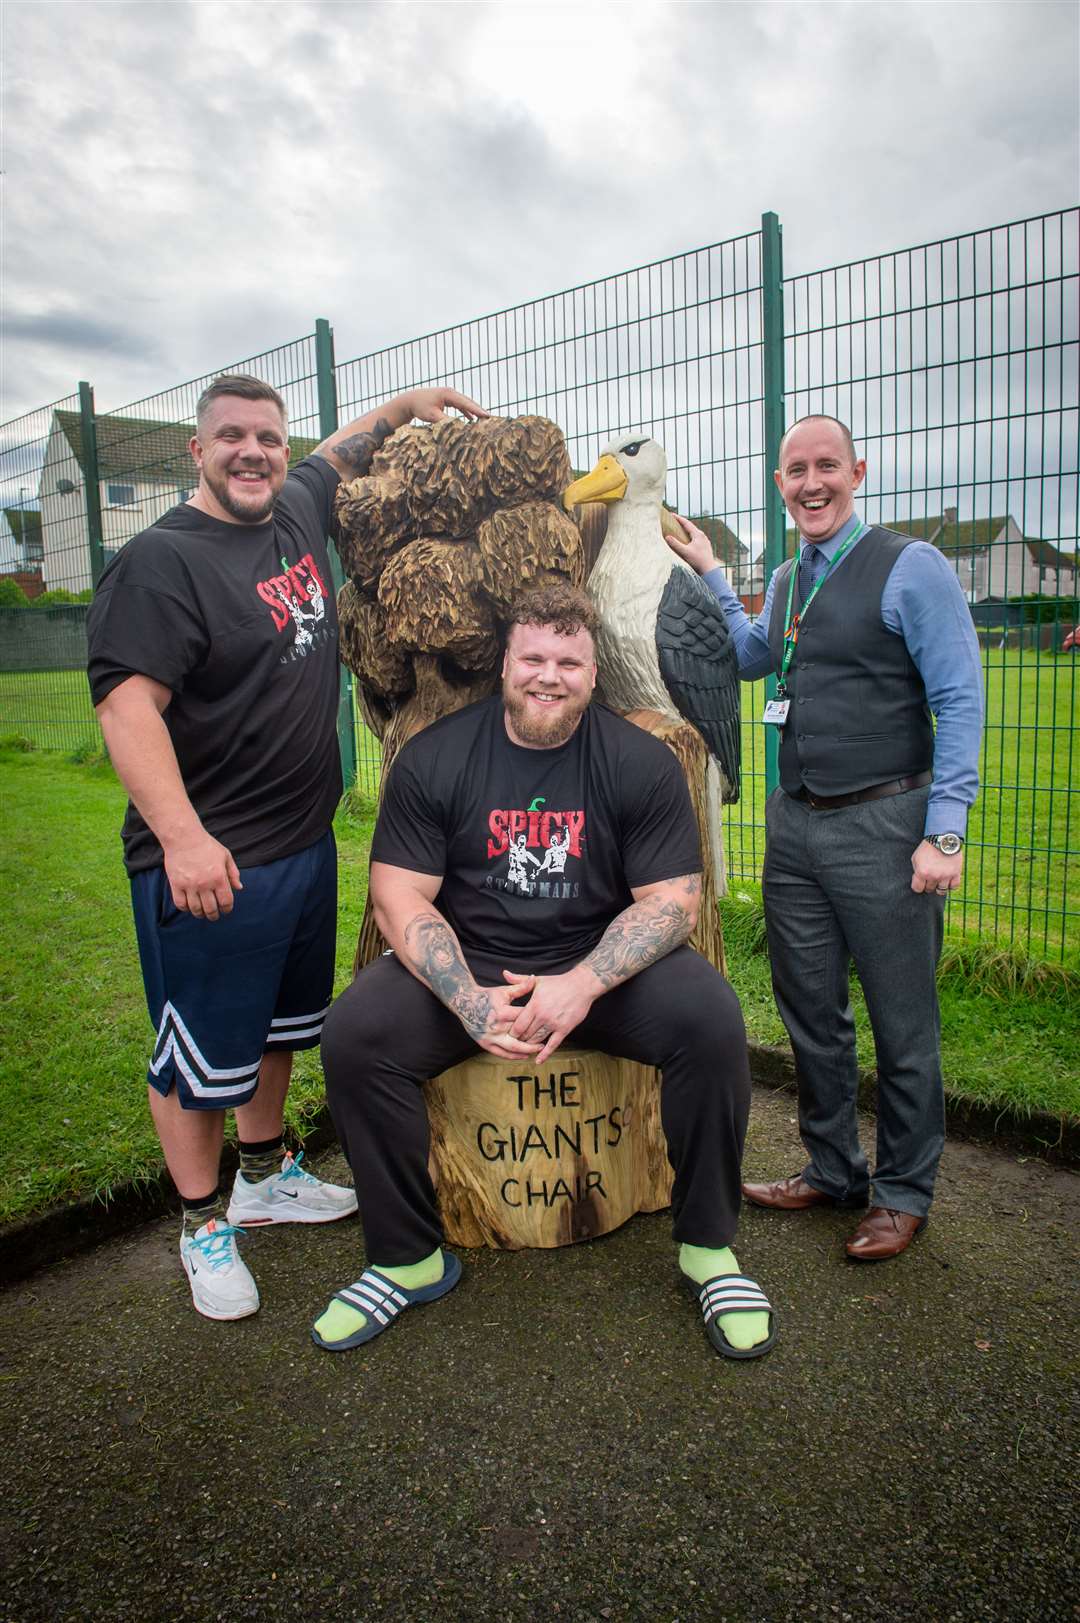 Tom and Luke Stoltman were surprised by school children at South Lodge with a specially made Giants Chair Bench thanks to a donation they made to the school.  They are pictured with director David Hayes-MacLeod.  Photo: Callum Mackay